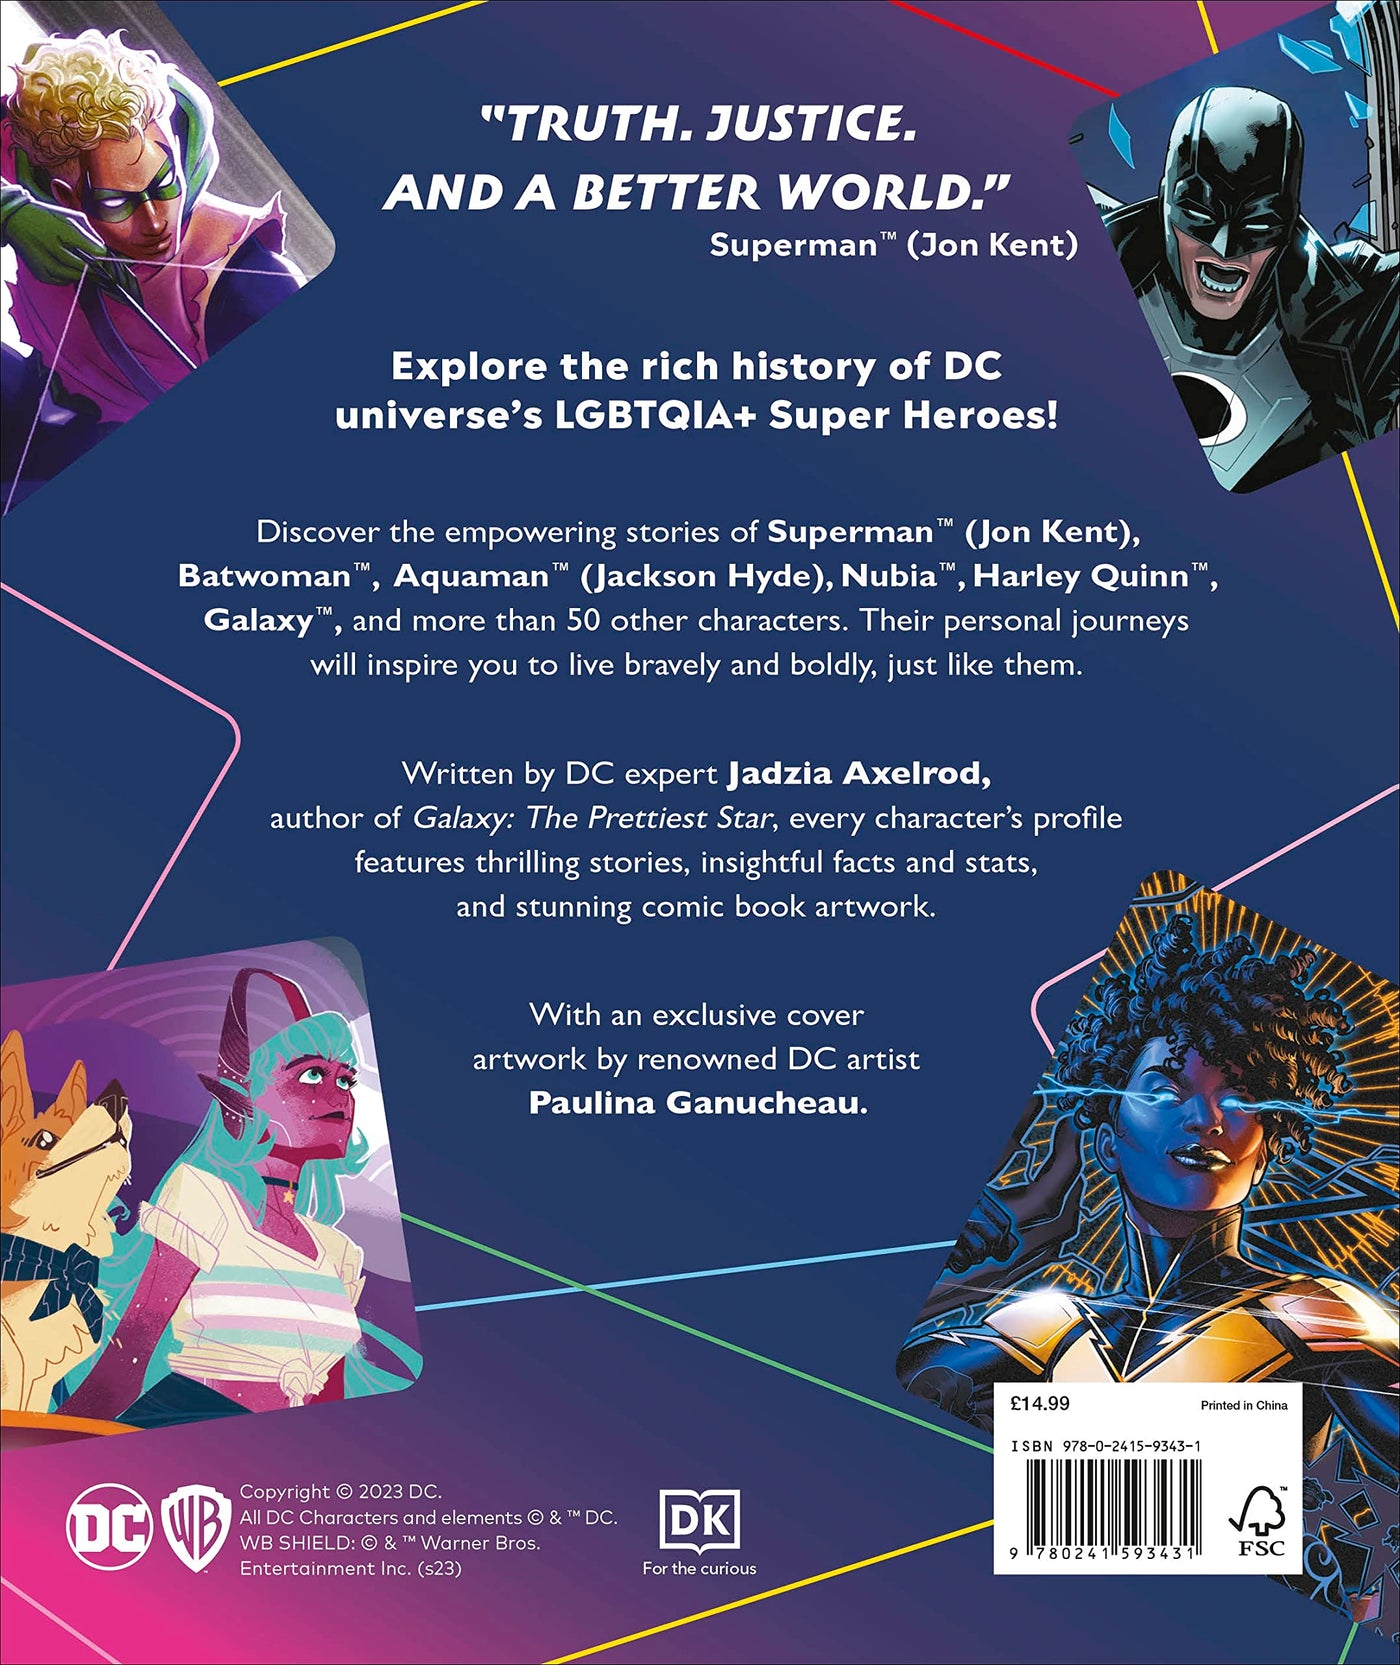 The DC Book of Pride - A Celebration of DC's LGBTQIA+ Characters